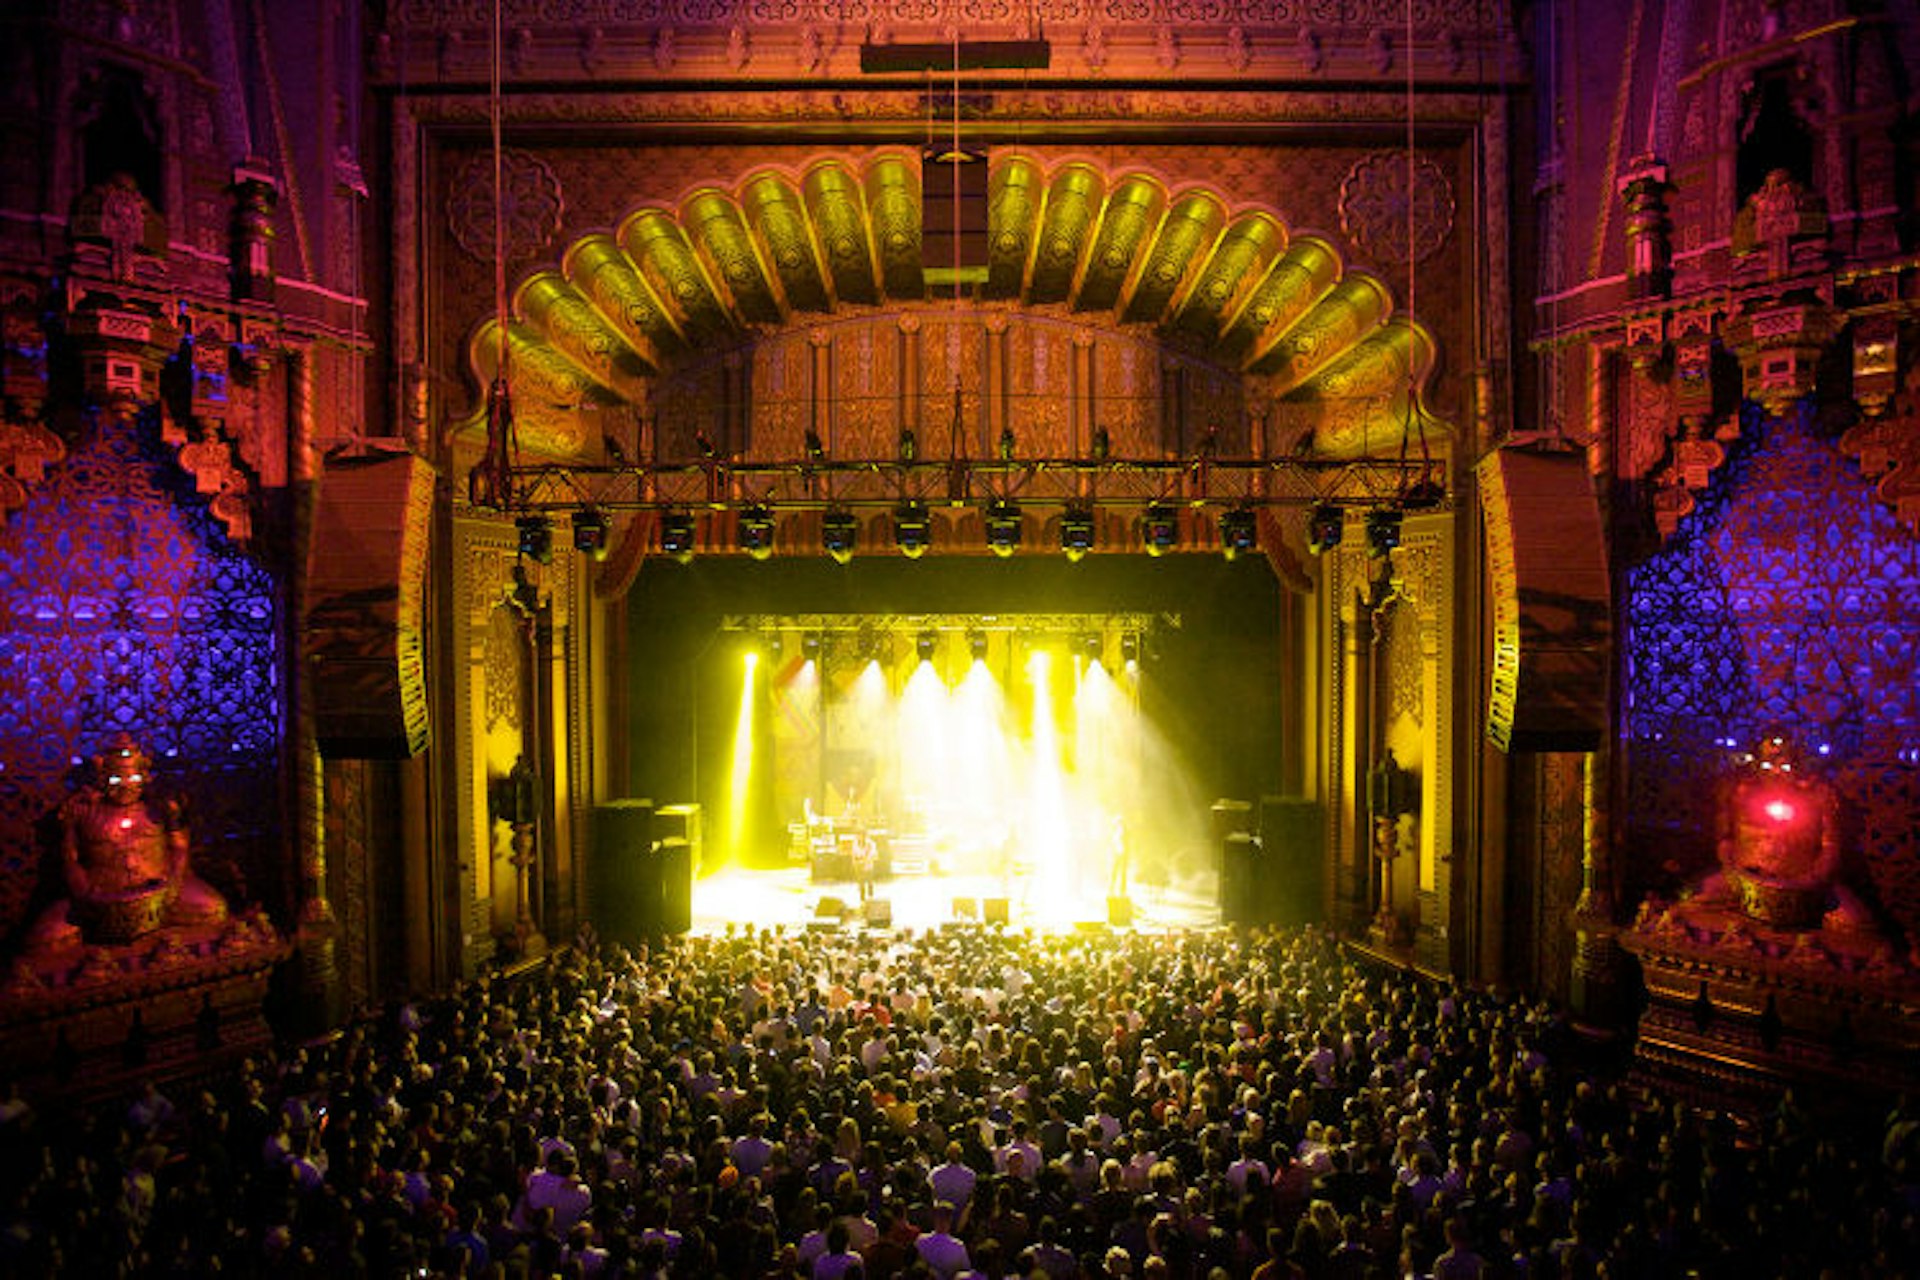 The beautiful Fox Theater is a great venue for concerts. Image by Josh Sanseri.